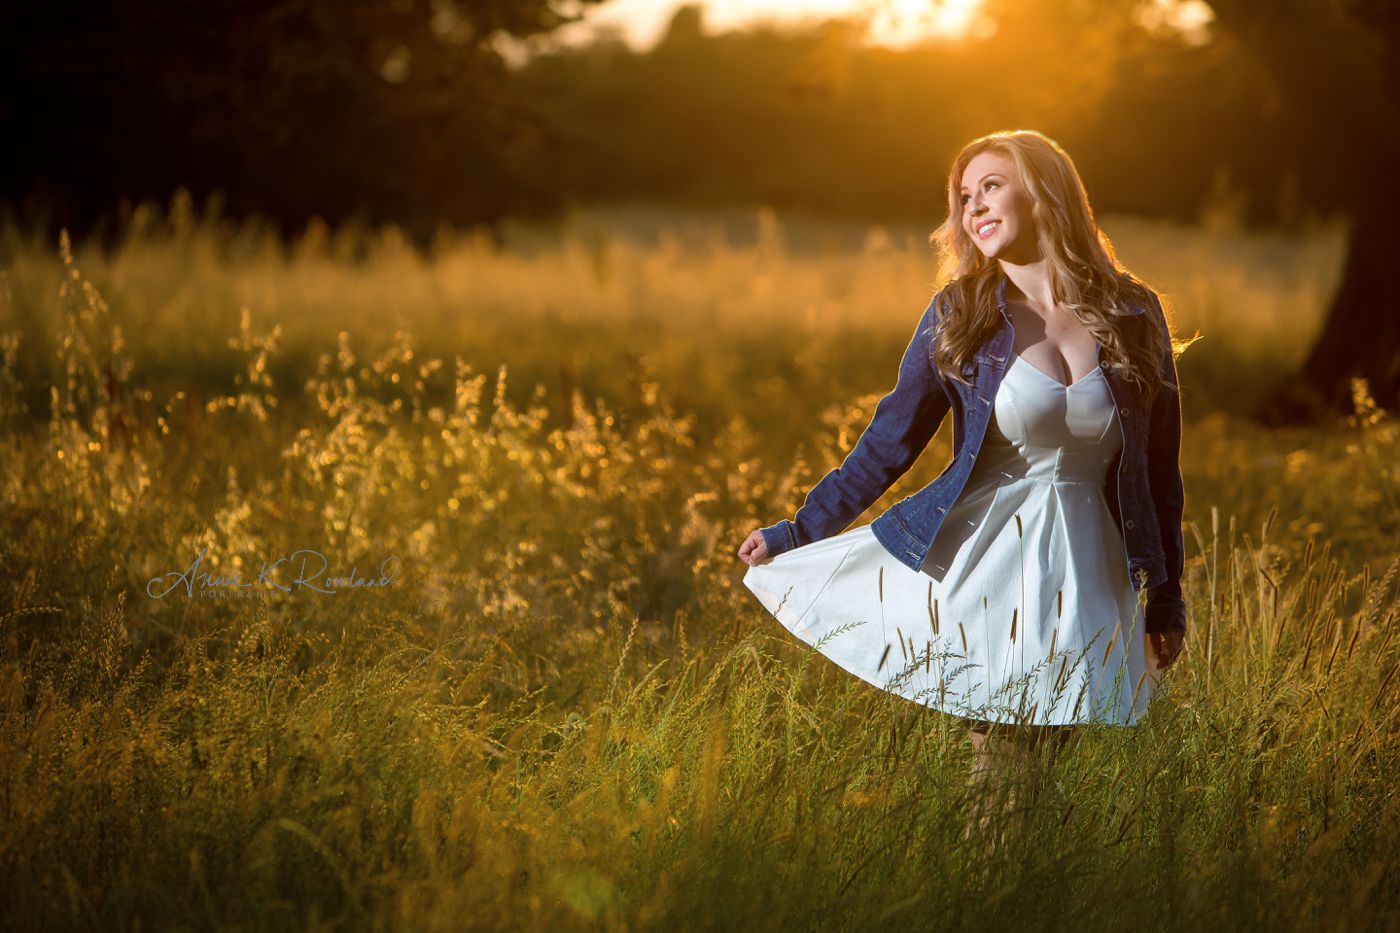 senior portraits at sunset in grass